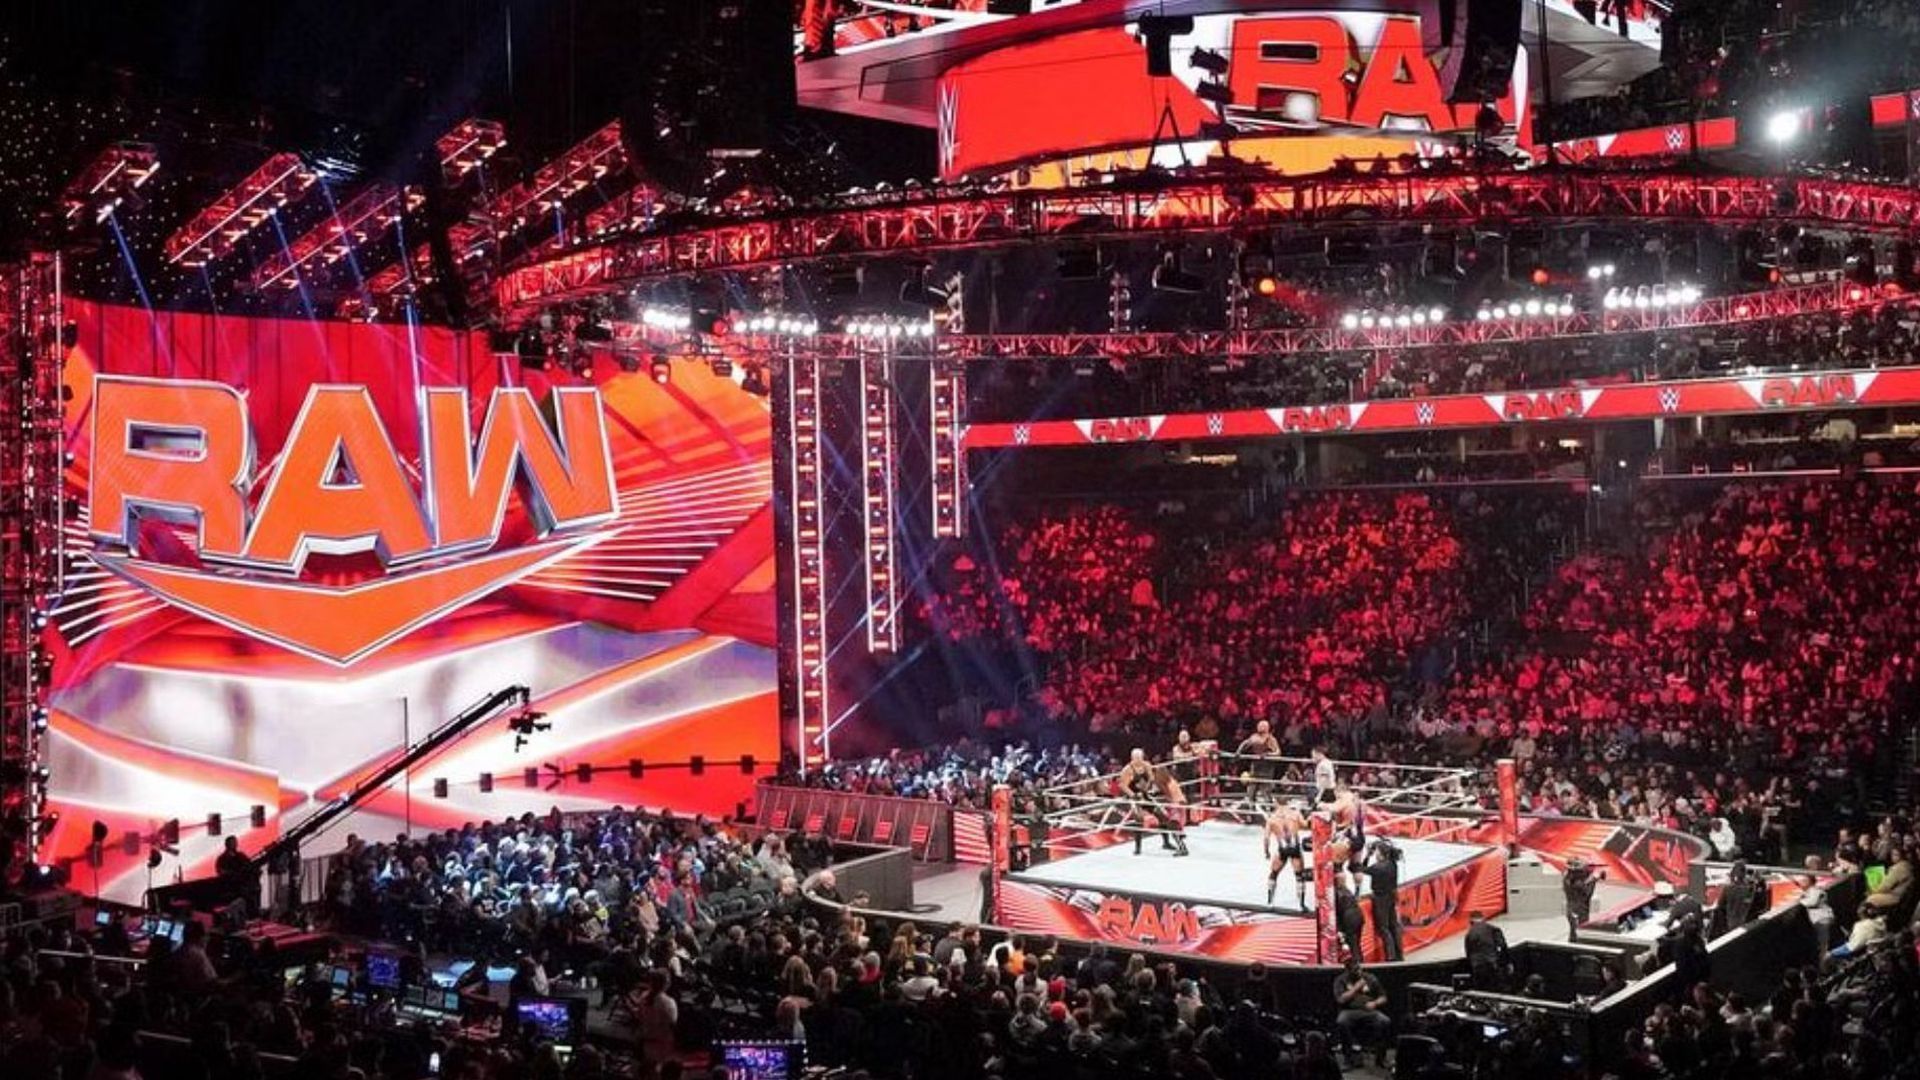 The WWE RAW logos and ring/stage on display inside arena